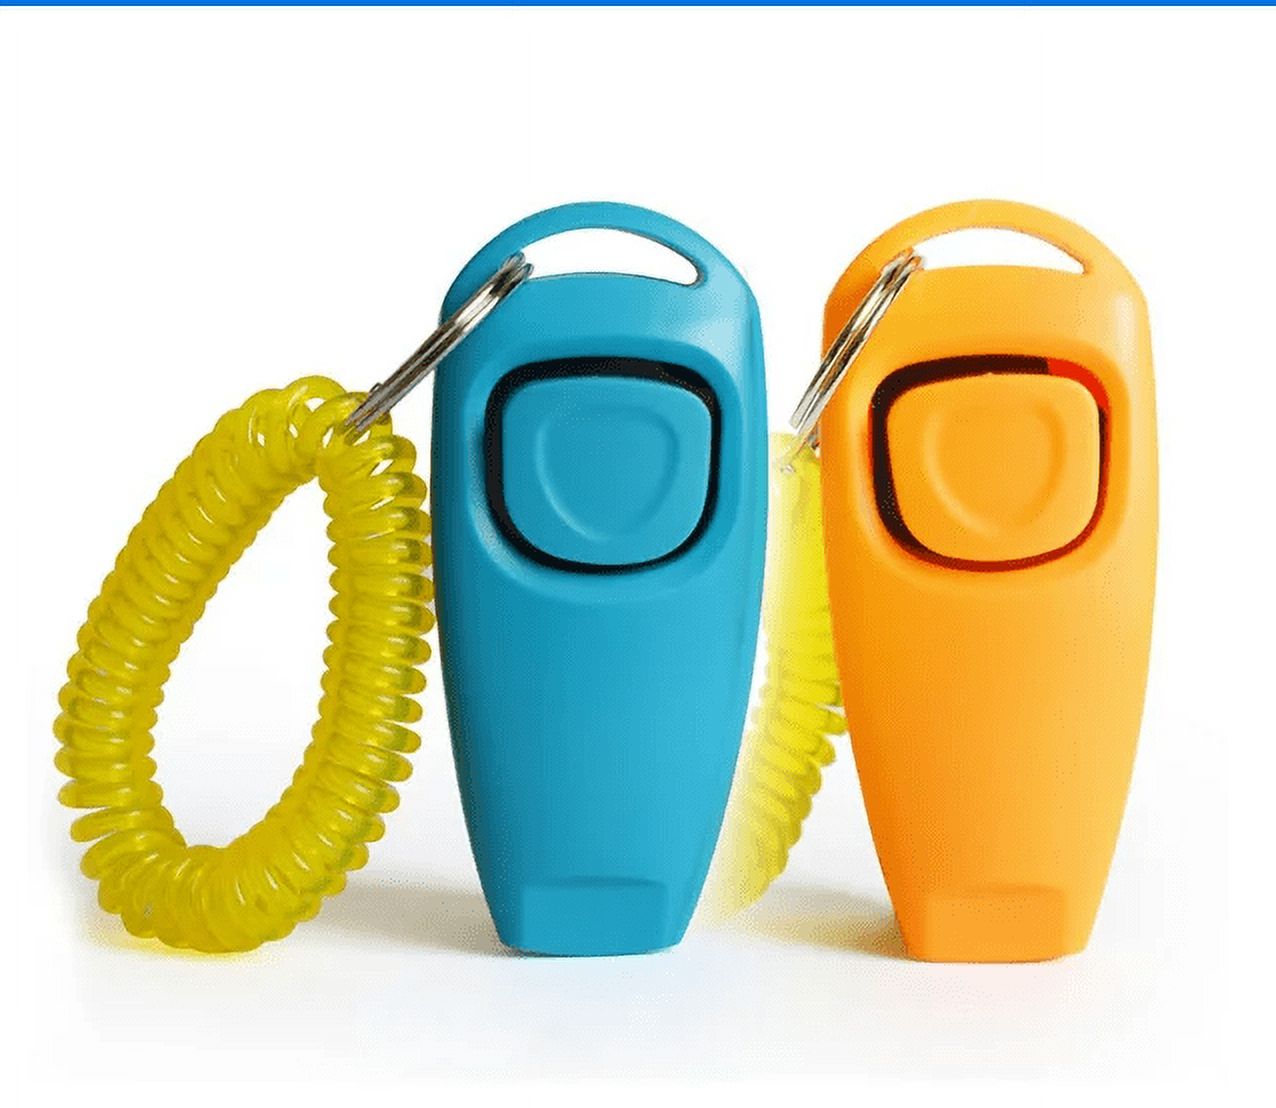 2pcs Dog Training Clickers 2 in 1 Whistle and Clicker Pet Training Tools  with Wrist Strap Key Ring for Dogs Cats Pets 